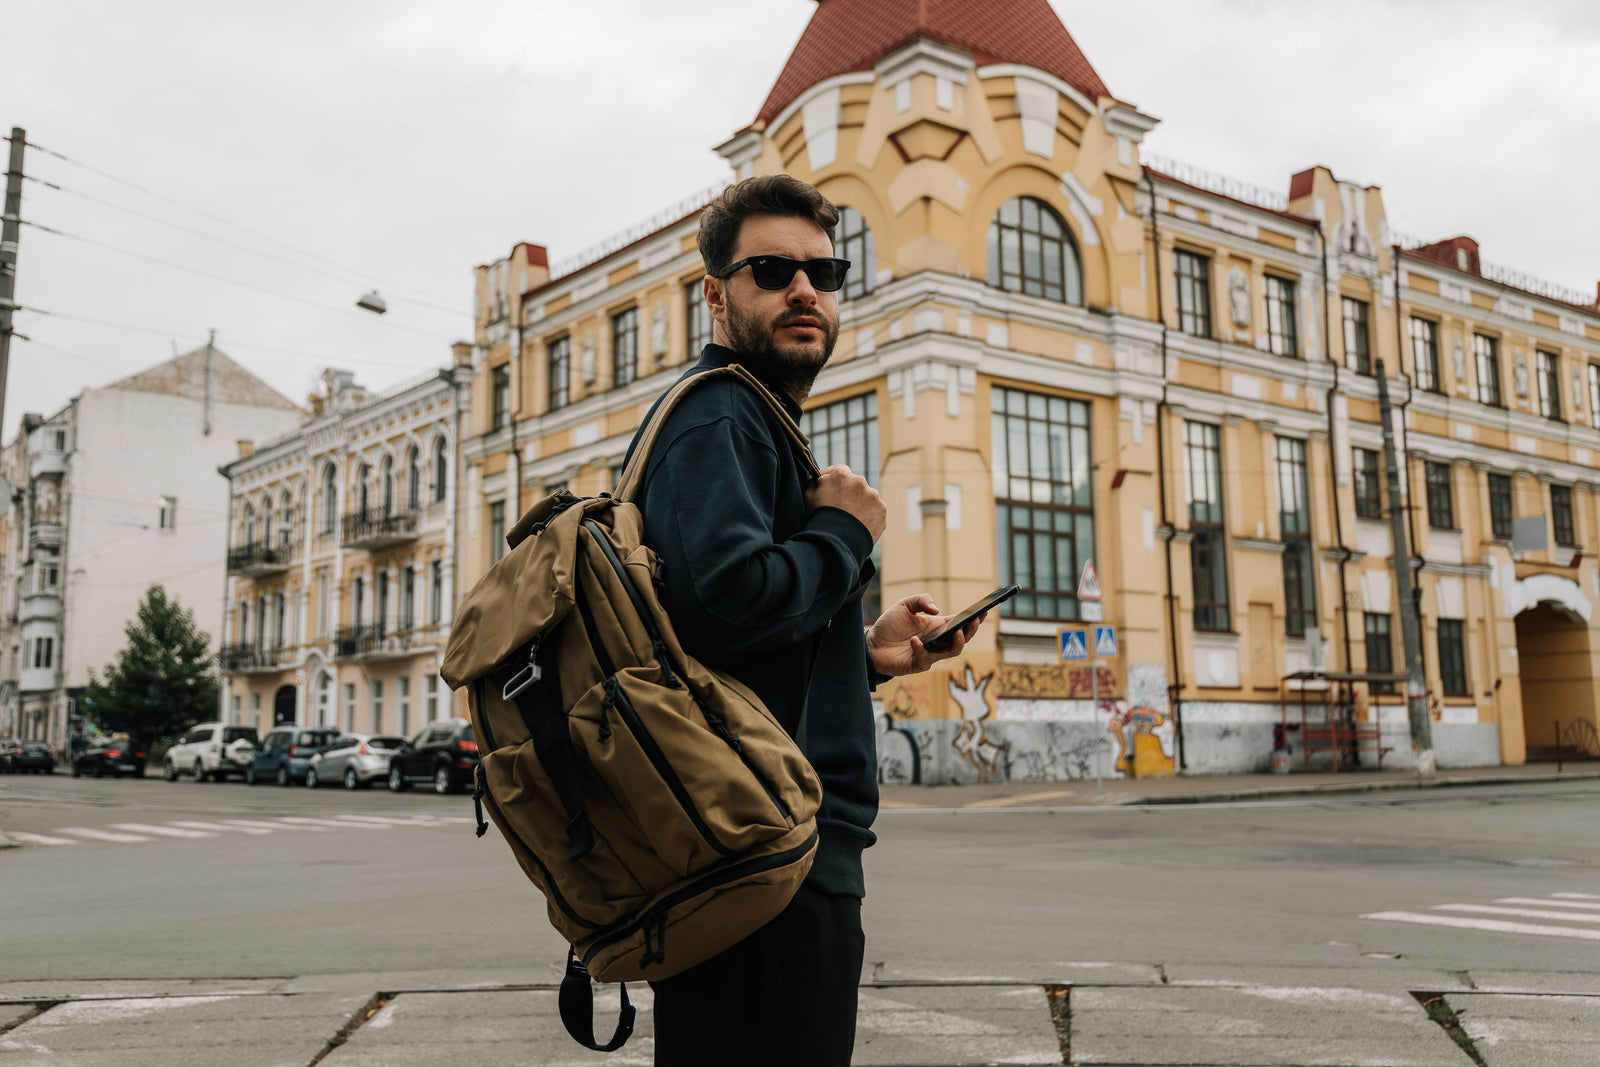 Illya Kabachynskiy, editor-in-chief at AIN.ua shares his lifestyle and routine